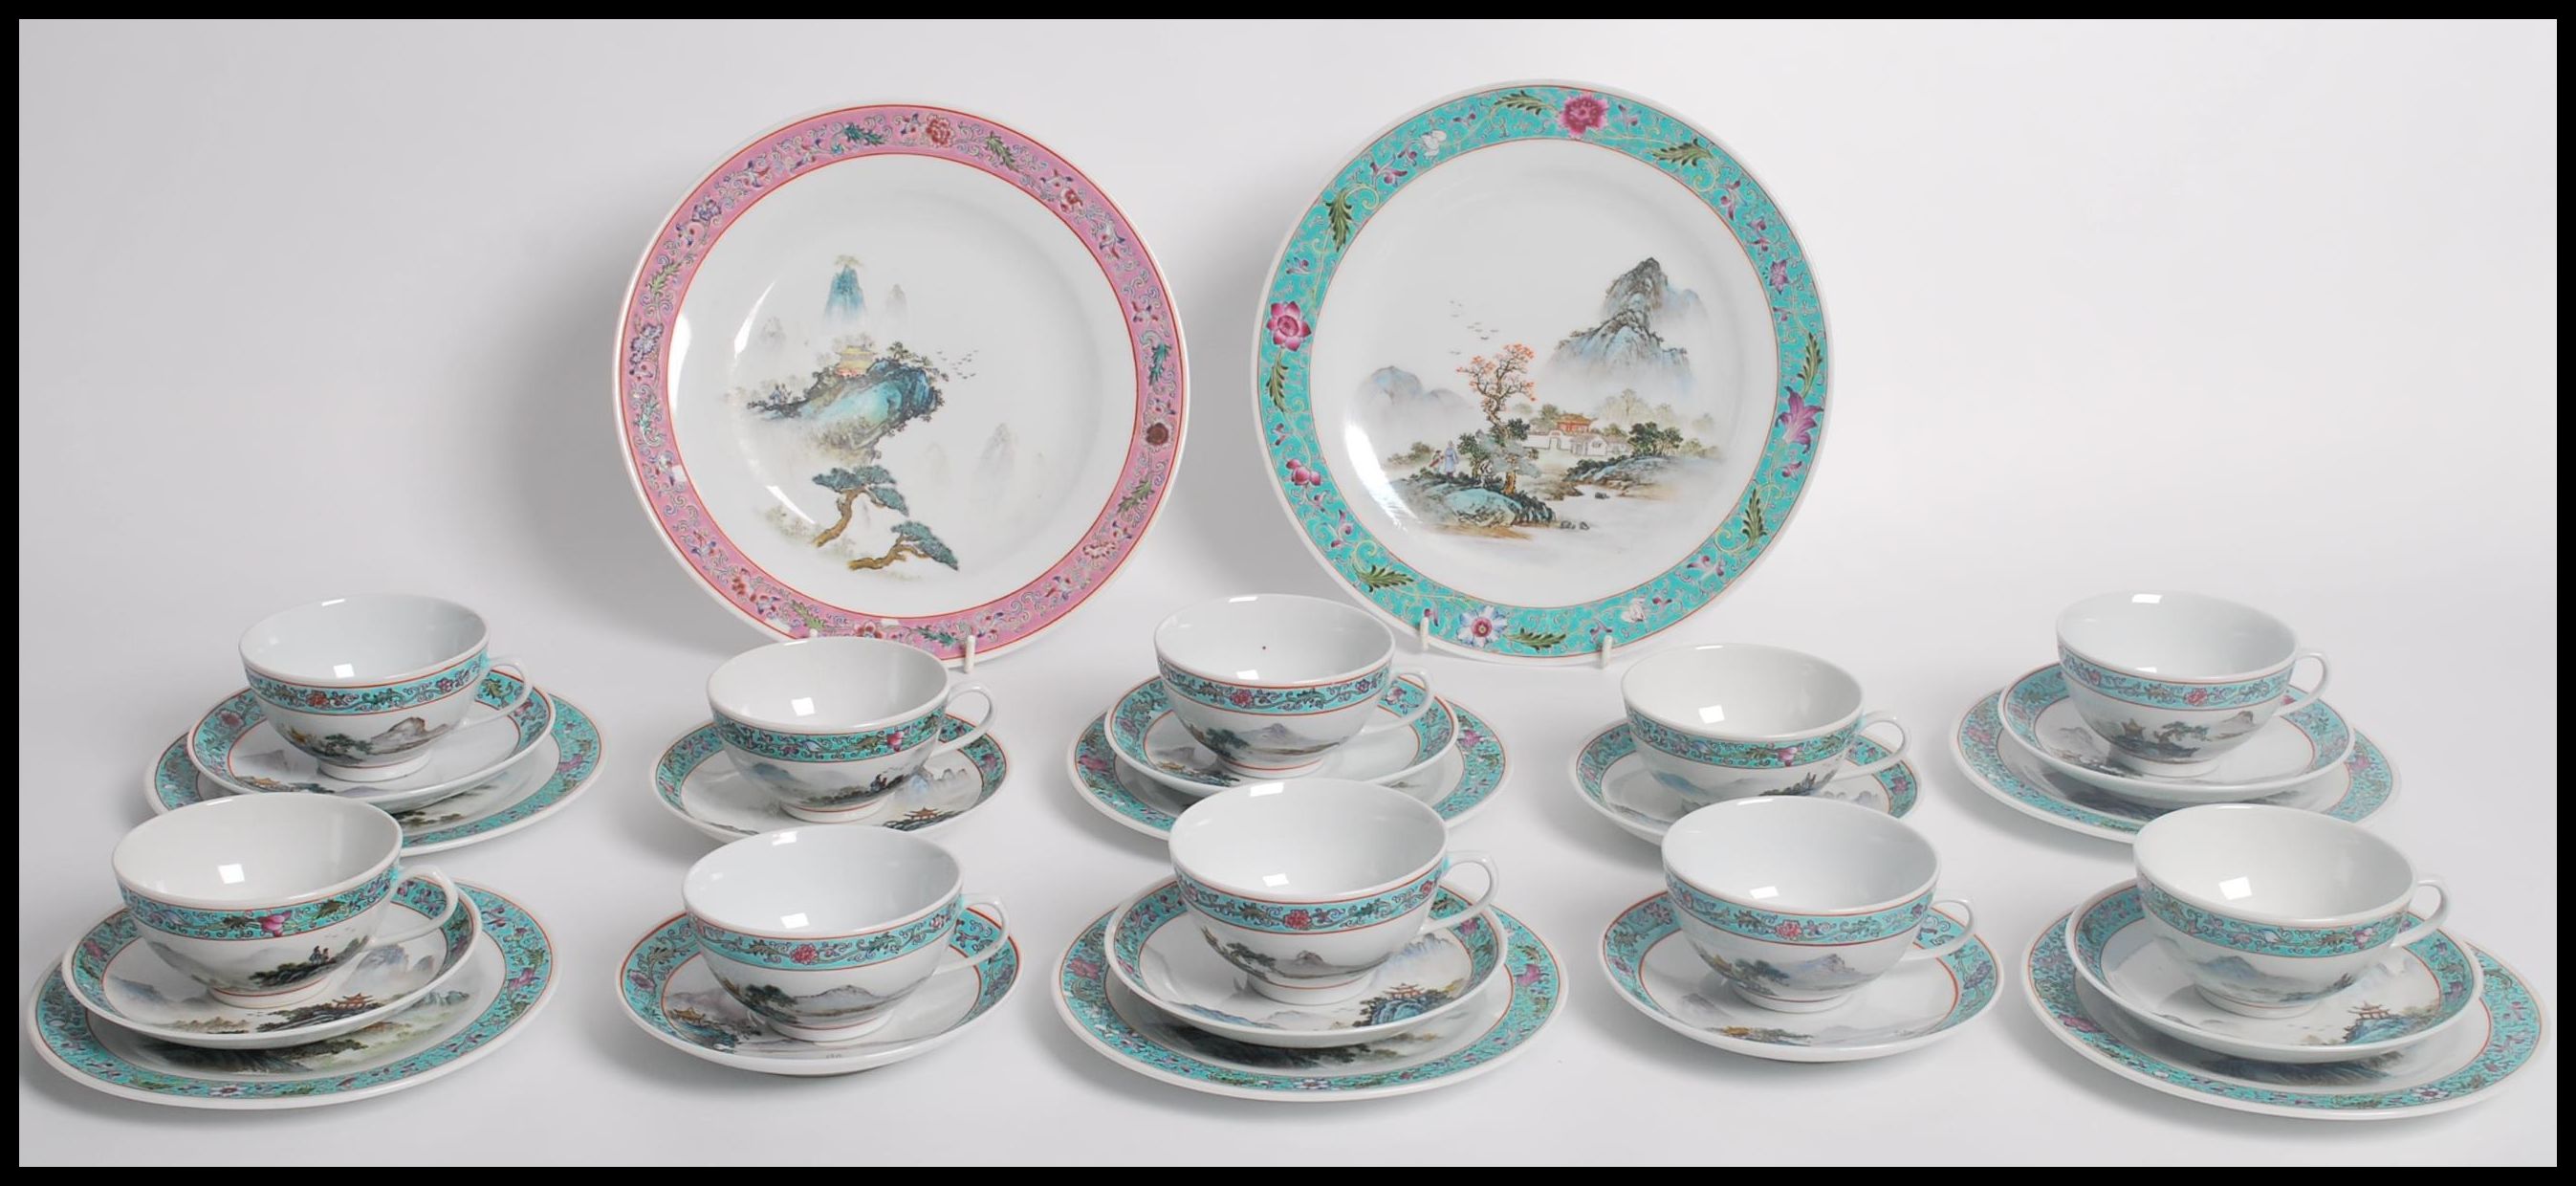 A matching service of Chinese Republic period hand painted cups saucers and plates depicting